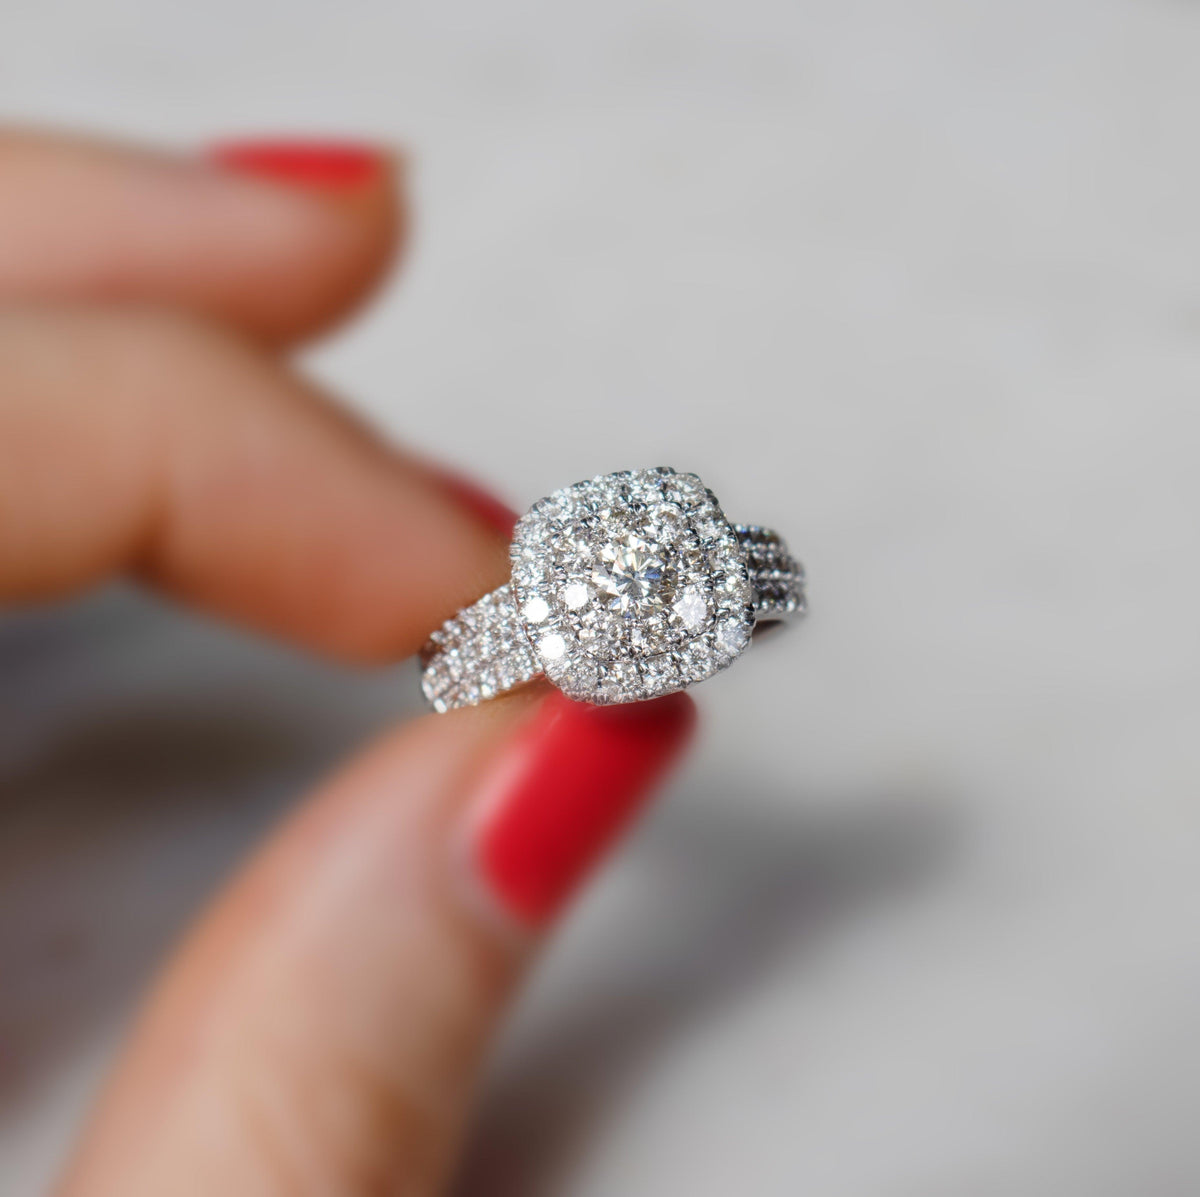 Round Brilliant Cut Diamond Double Halo Ring in 9ct White Gold - Wallace Bishop